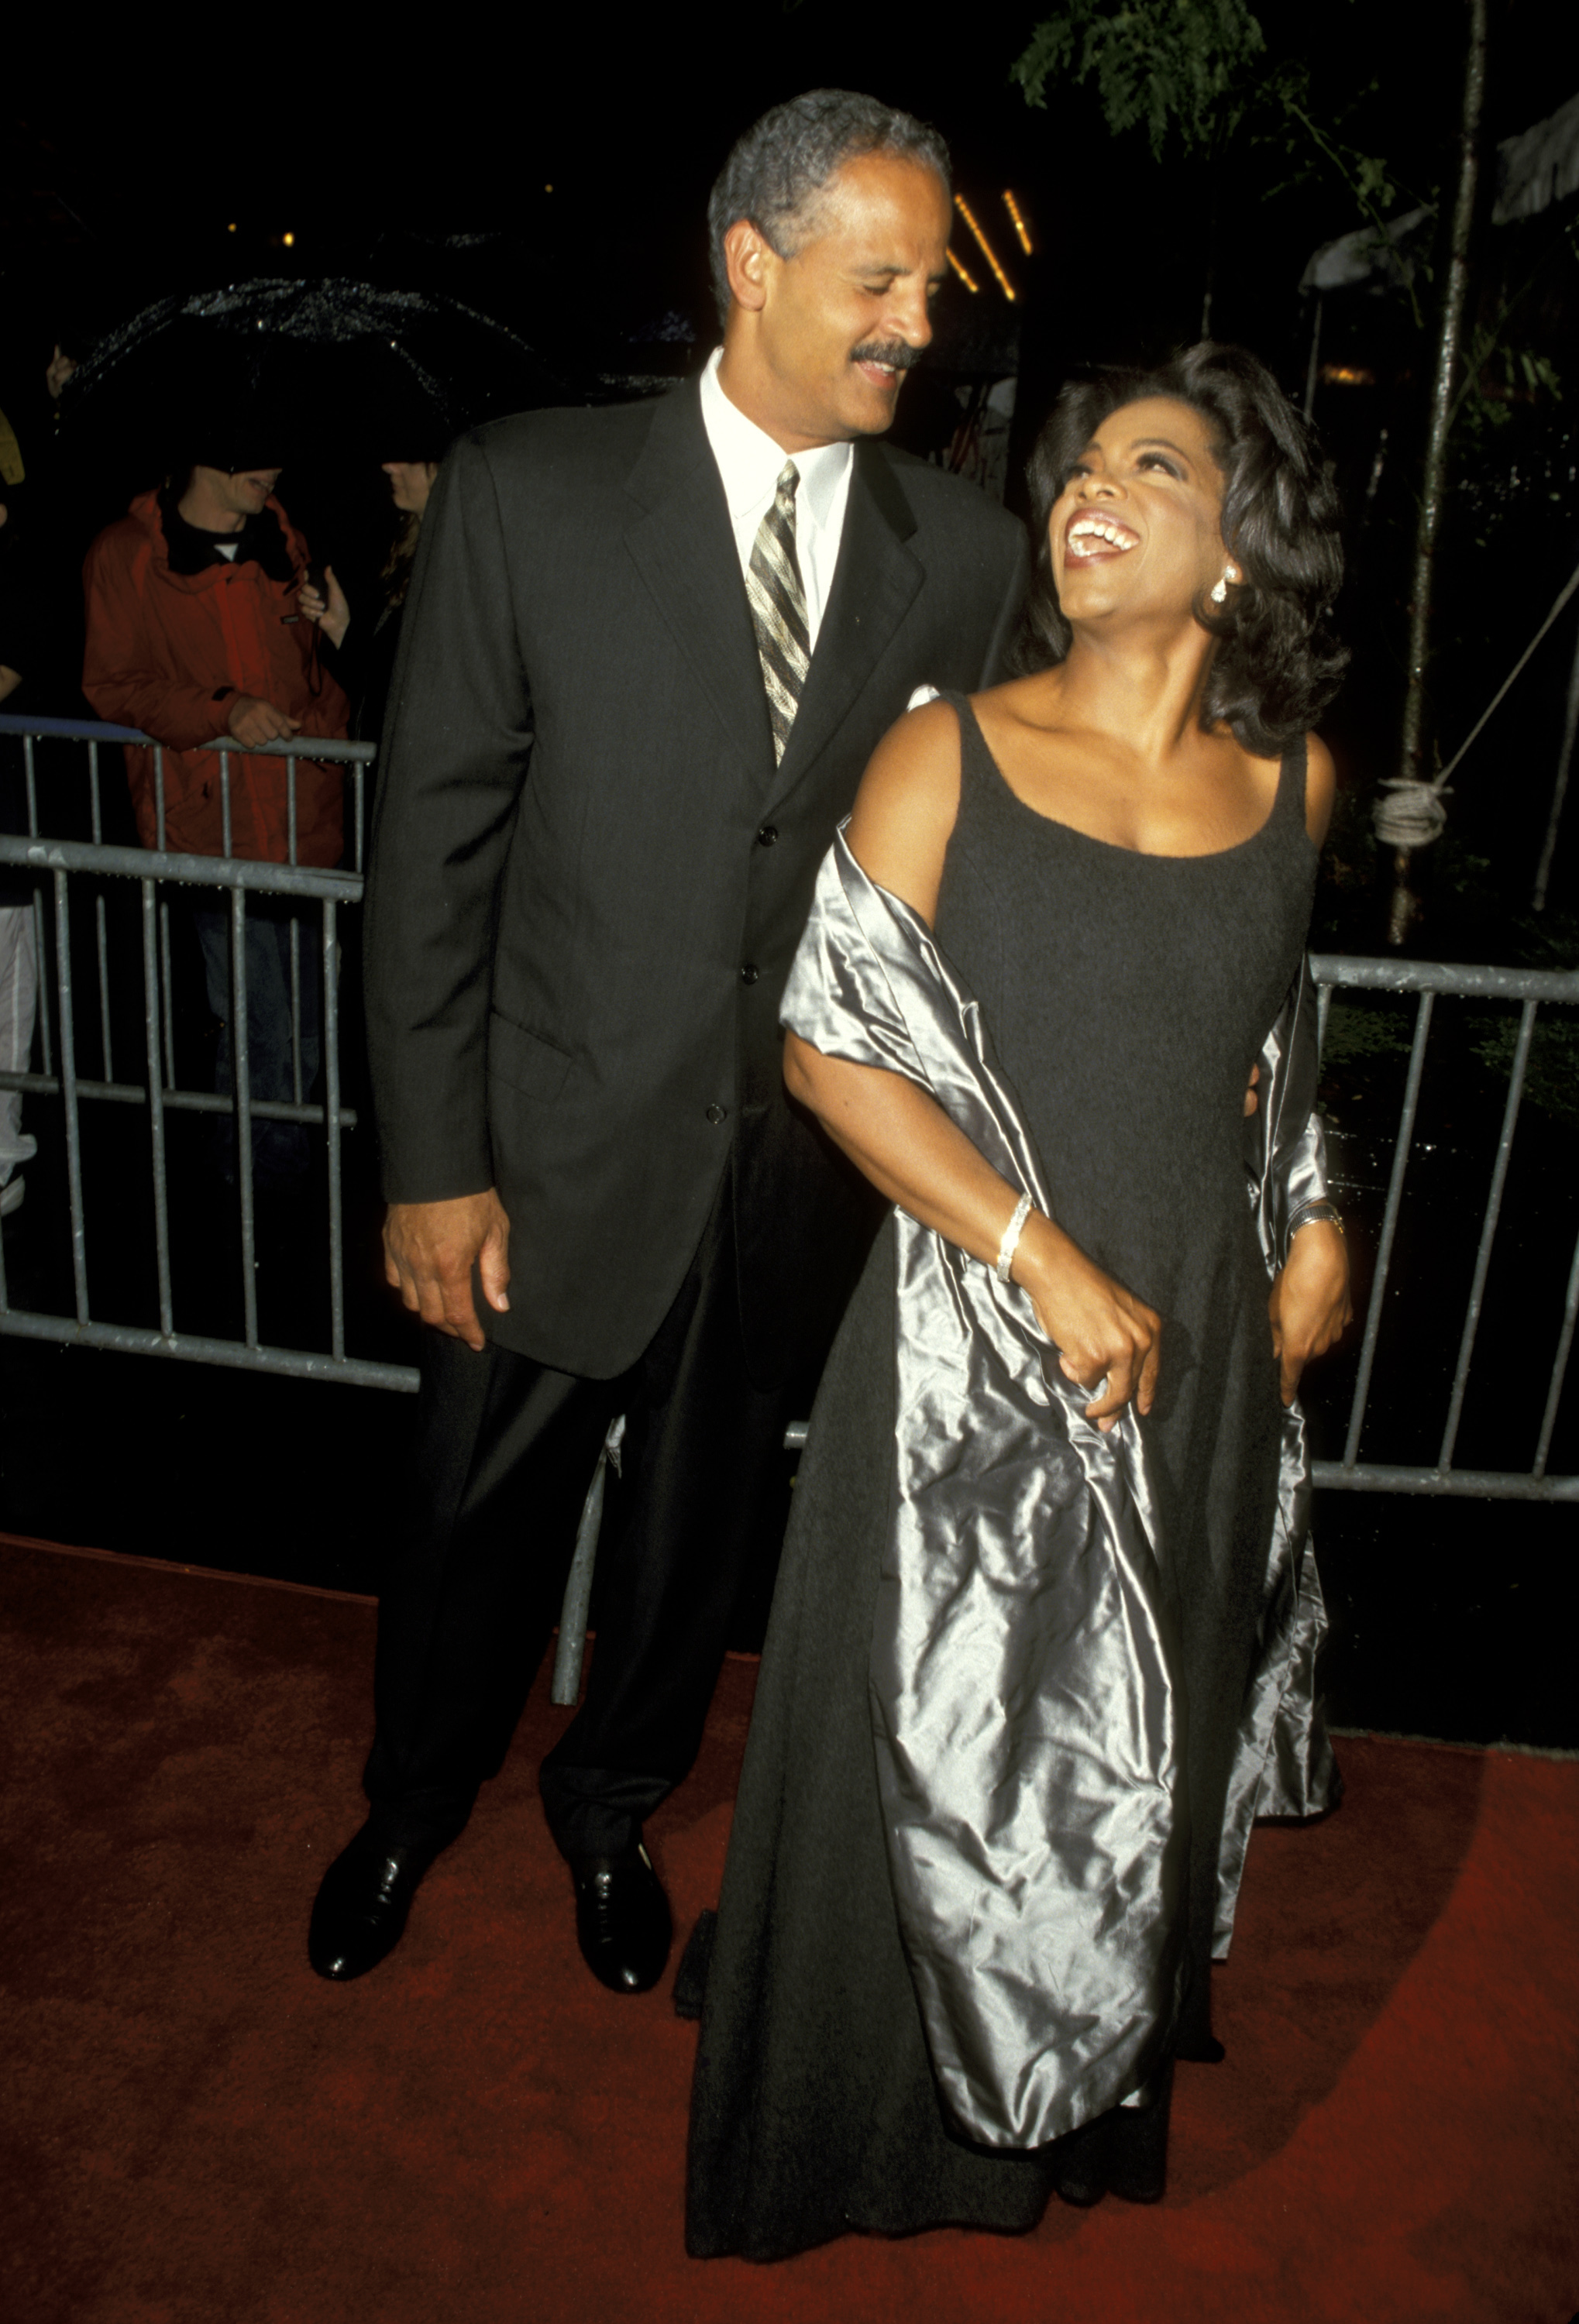 Stedman Graham and Oprah Winfrey in New York City on October 8, 1998 | Source: Getty Images